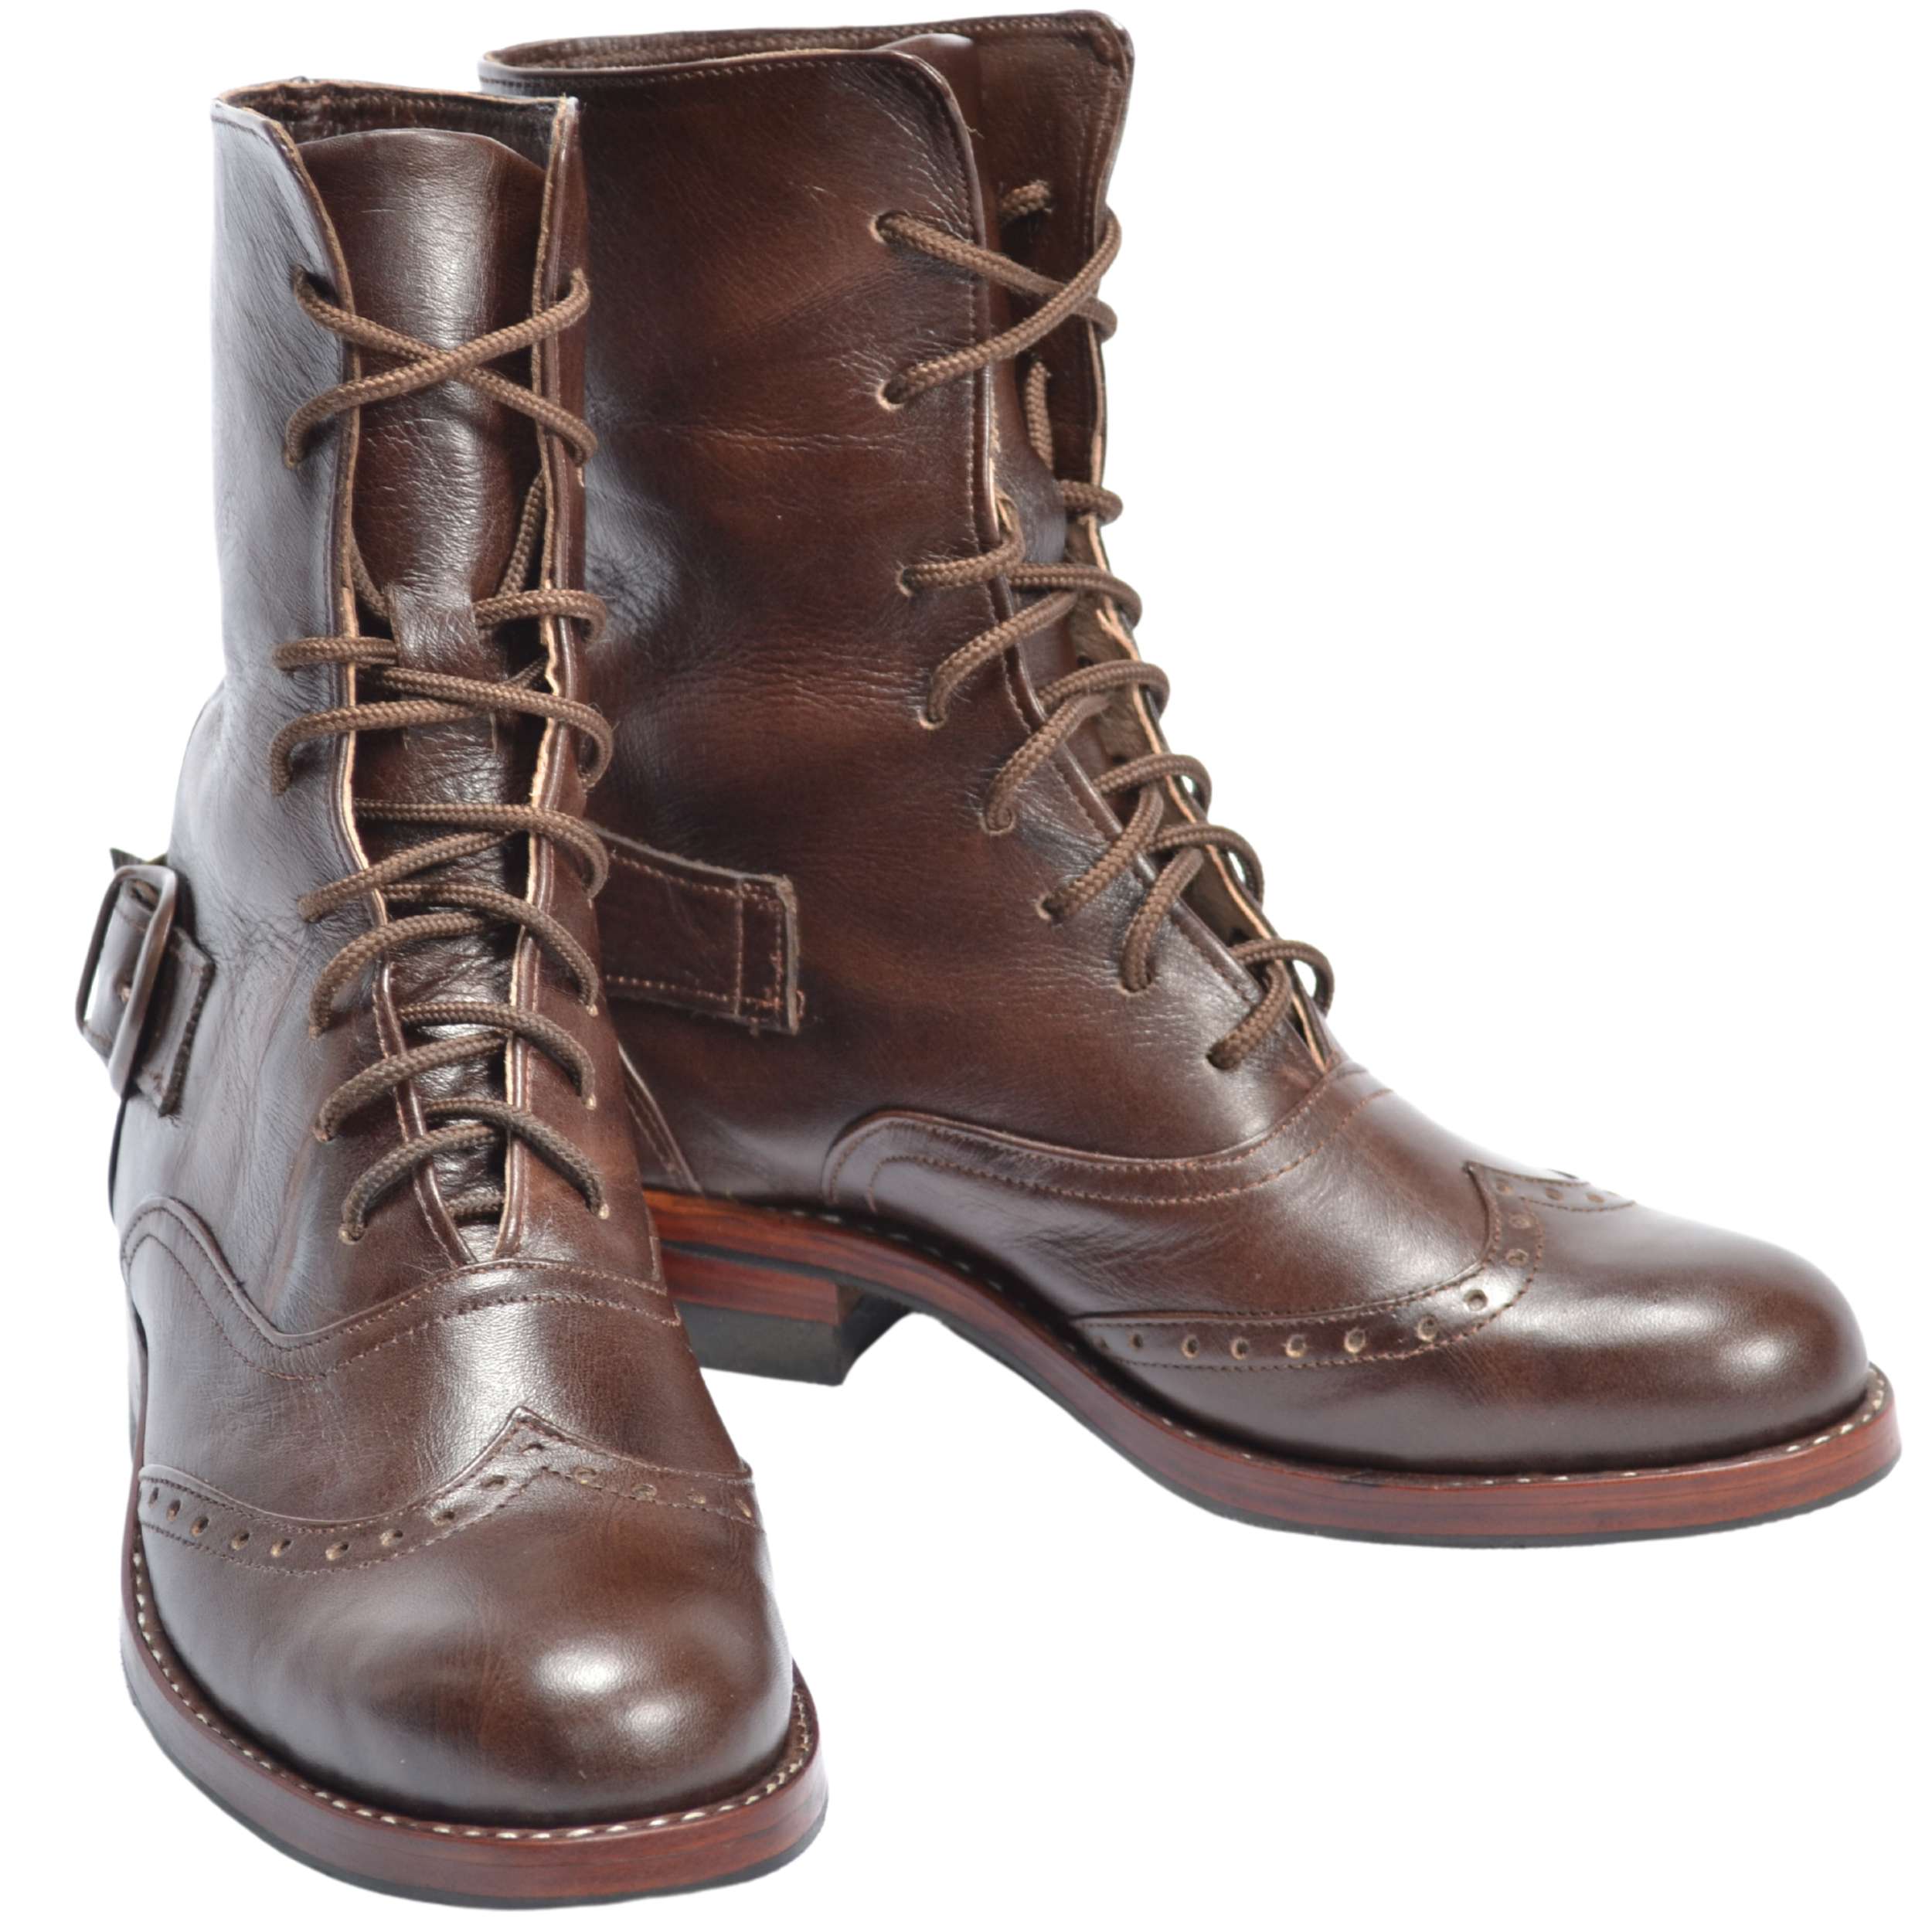 Leather lace up boots